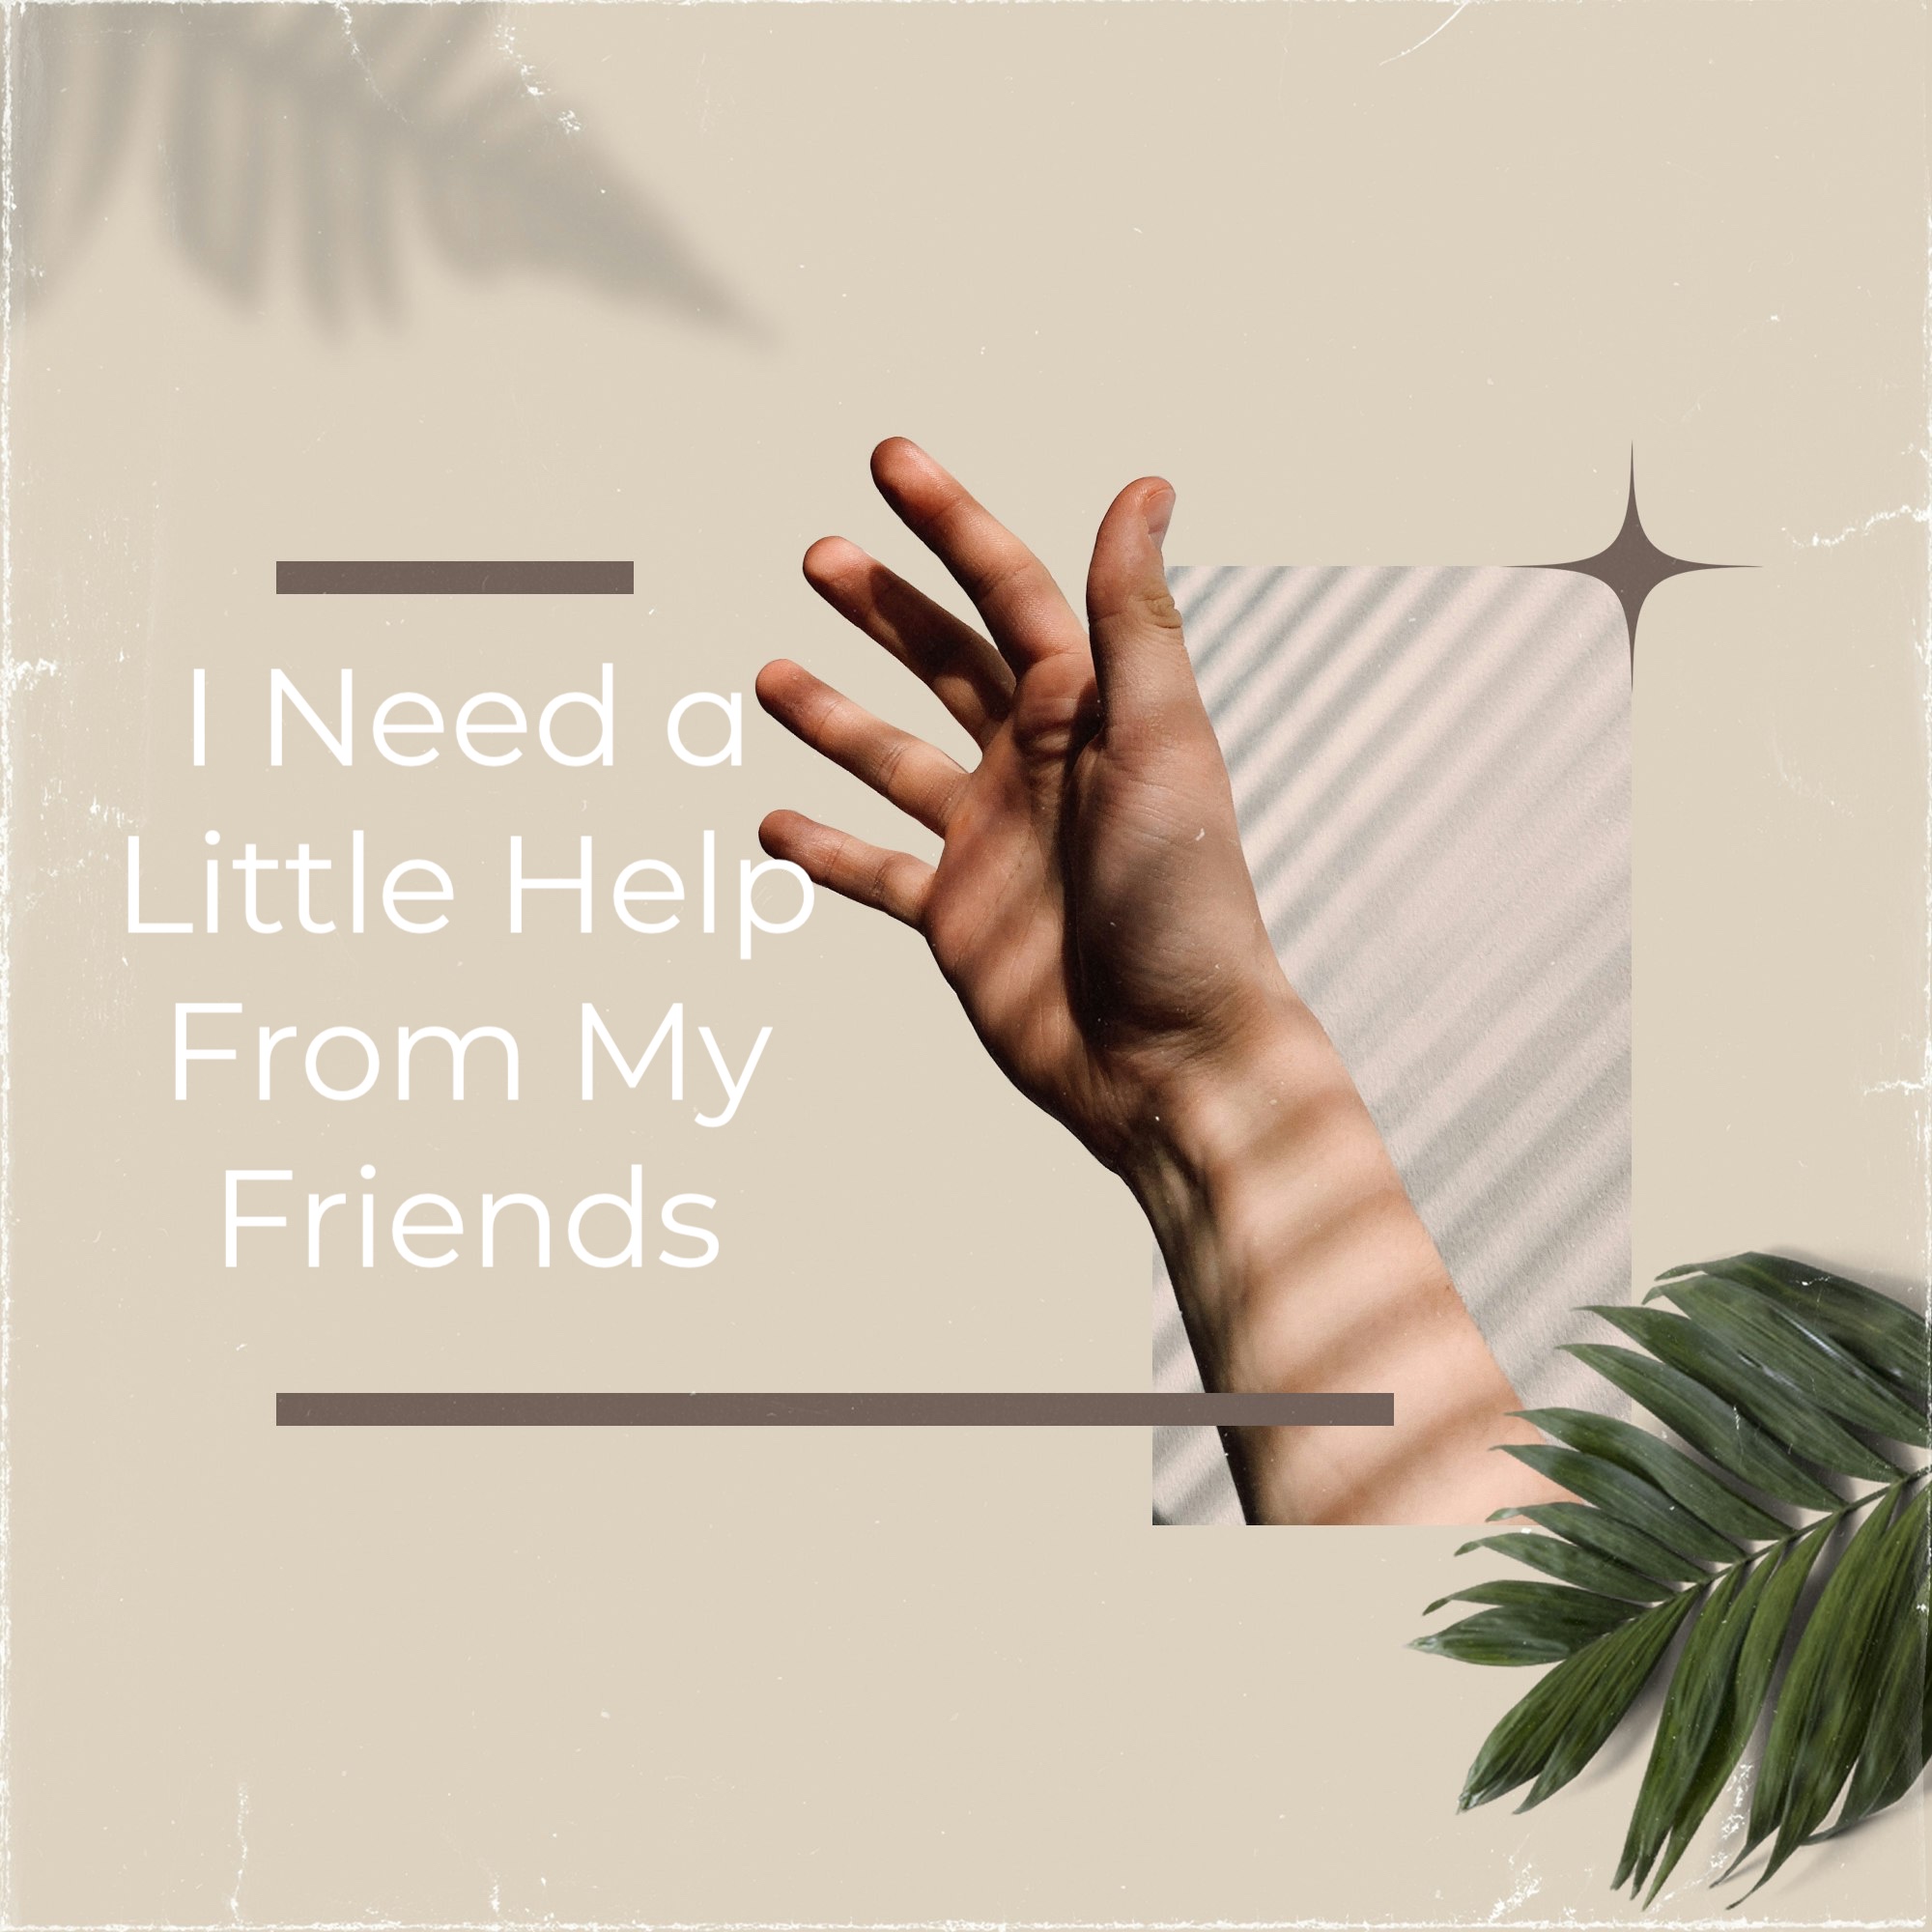 I Need a Little Help From My Friends